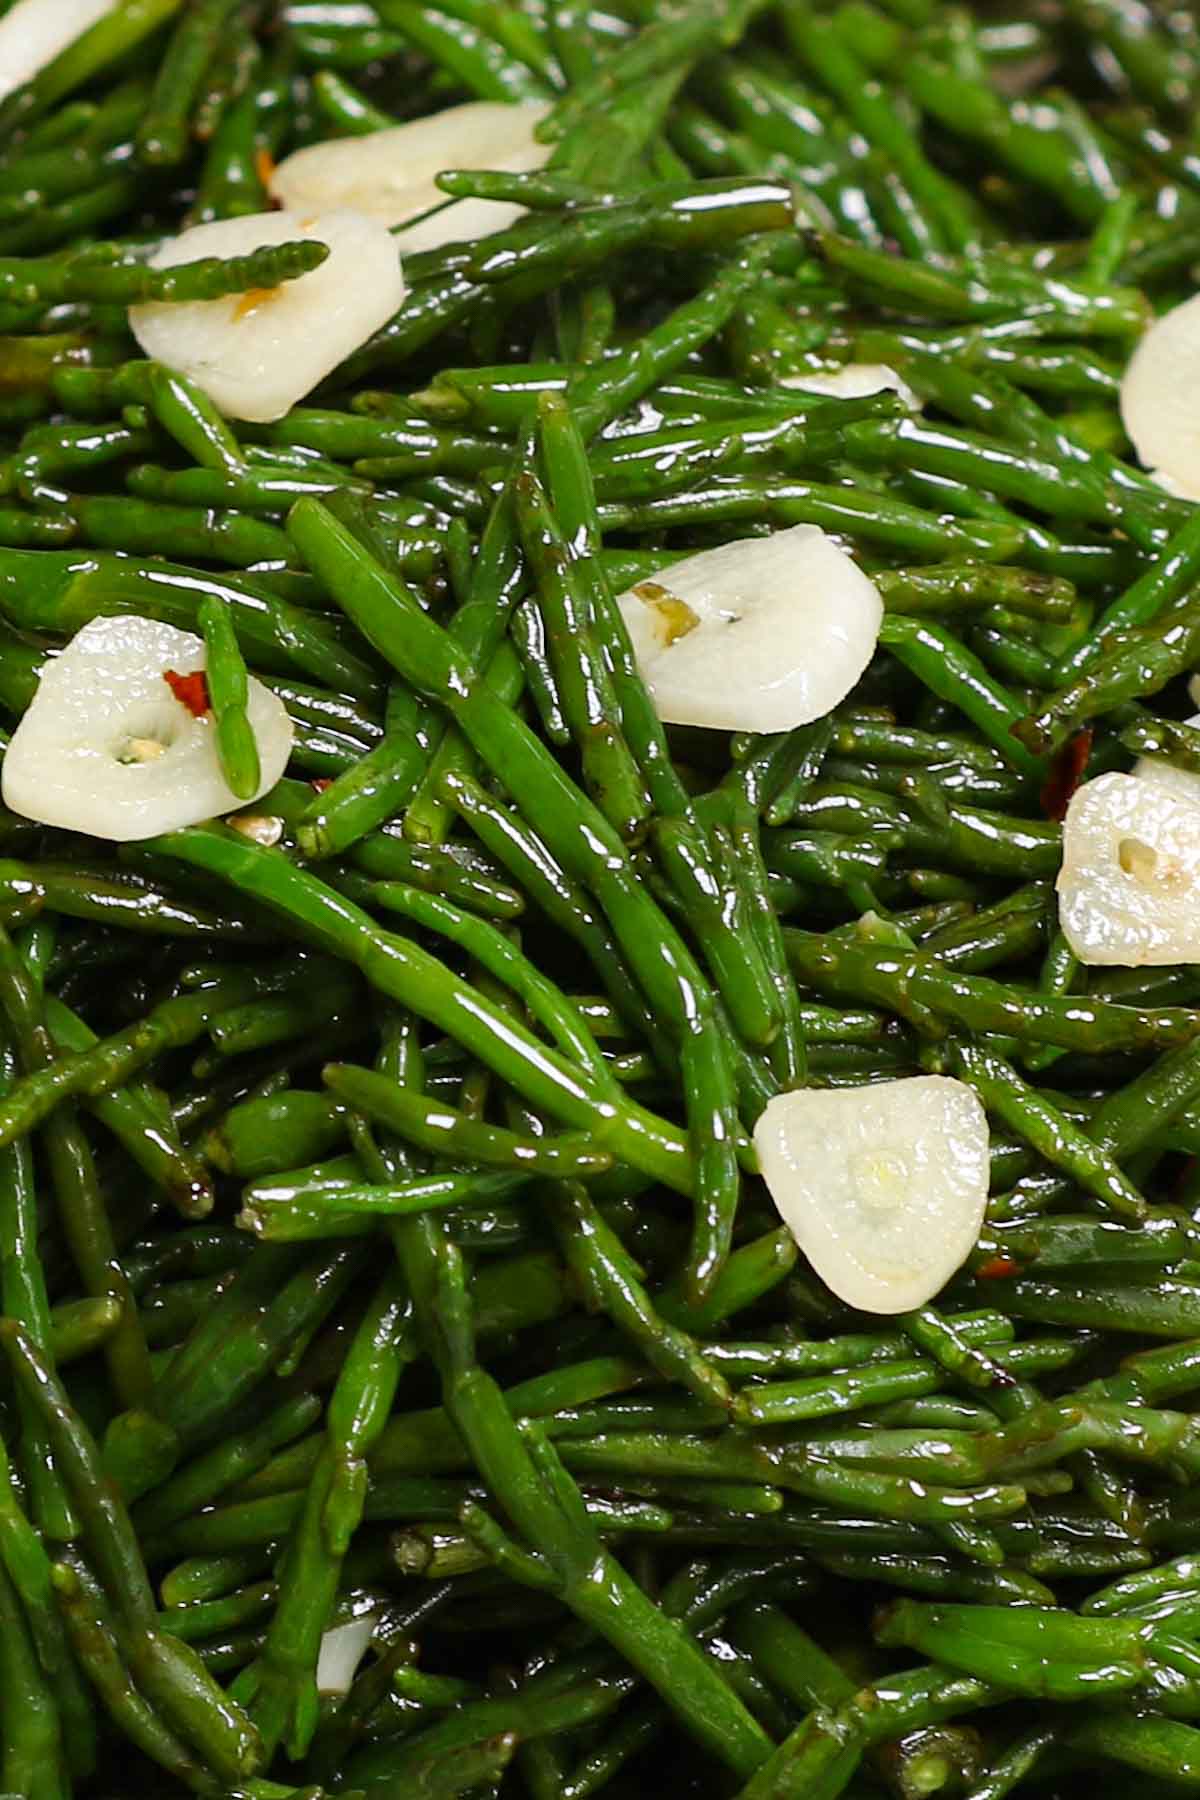 Sauteed sea beans with garlic and red pepper flakes